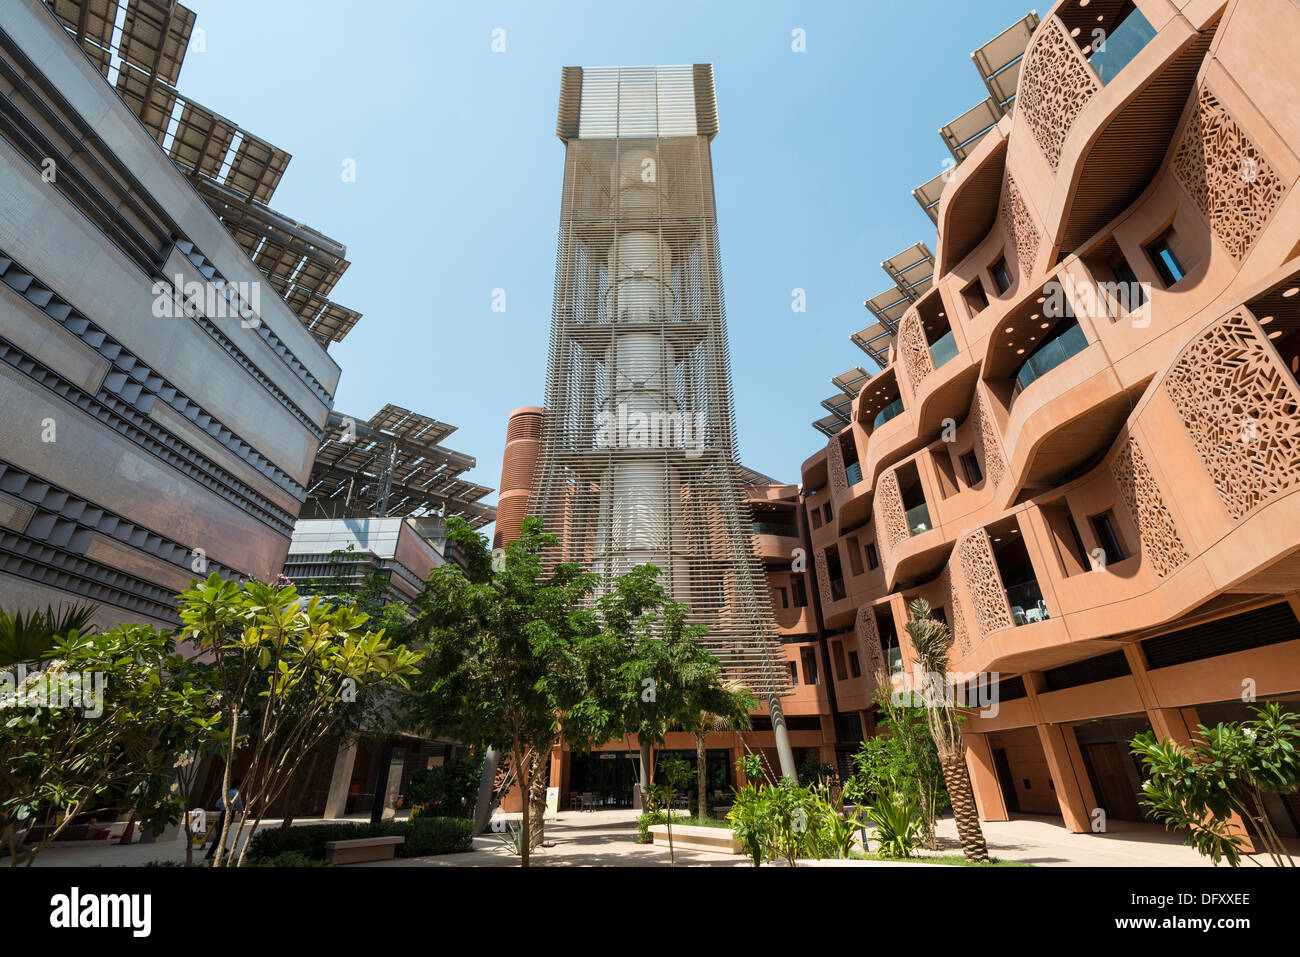 Wind tower providing cool air to courtyard at Institute of Science and Technology at Masdar City Abu Dhabi United Arab Emirates Stock Photo